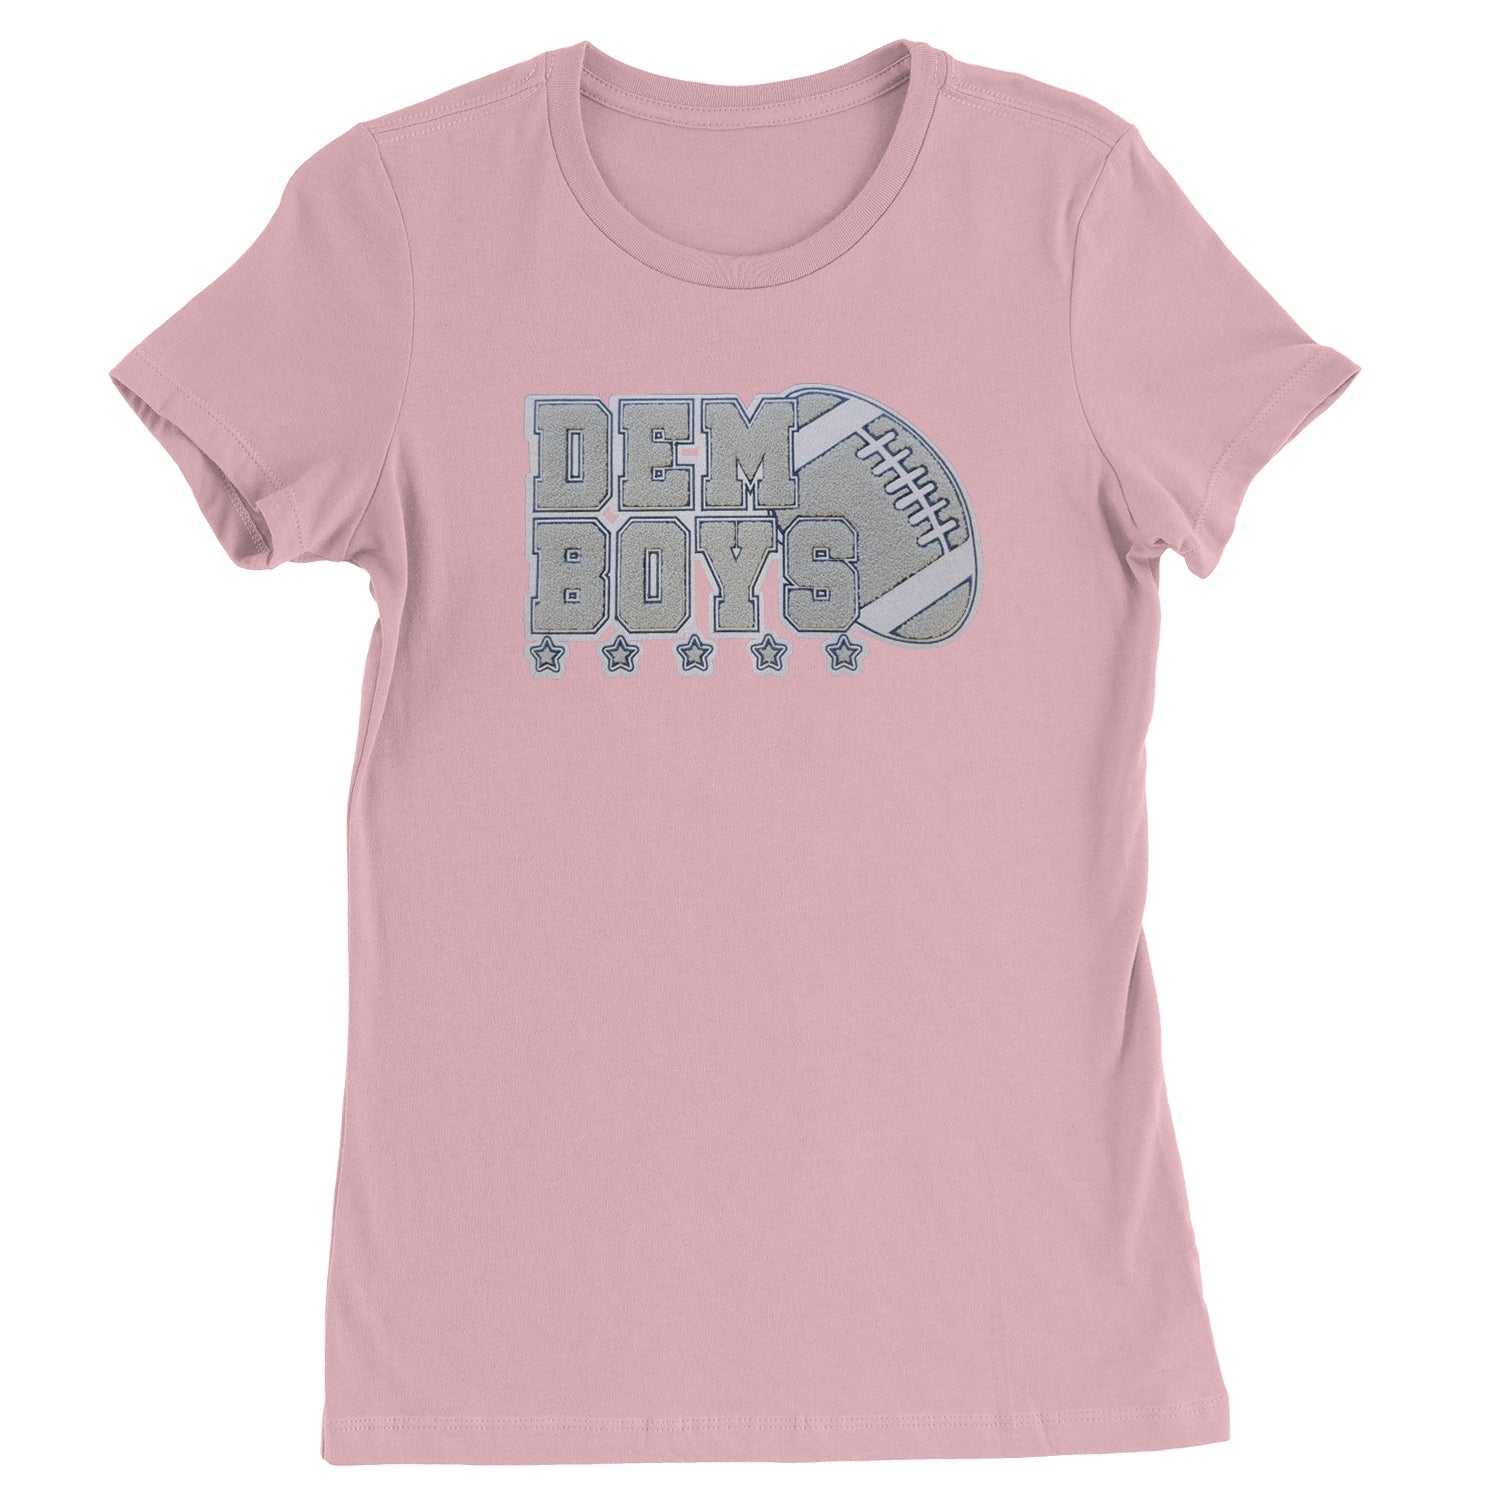 Dem Boys Embroidered Patch 2 Womens T-shirt dallas, fan, jersey, team, texas by Expression Tees